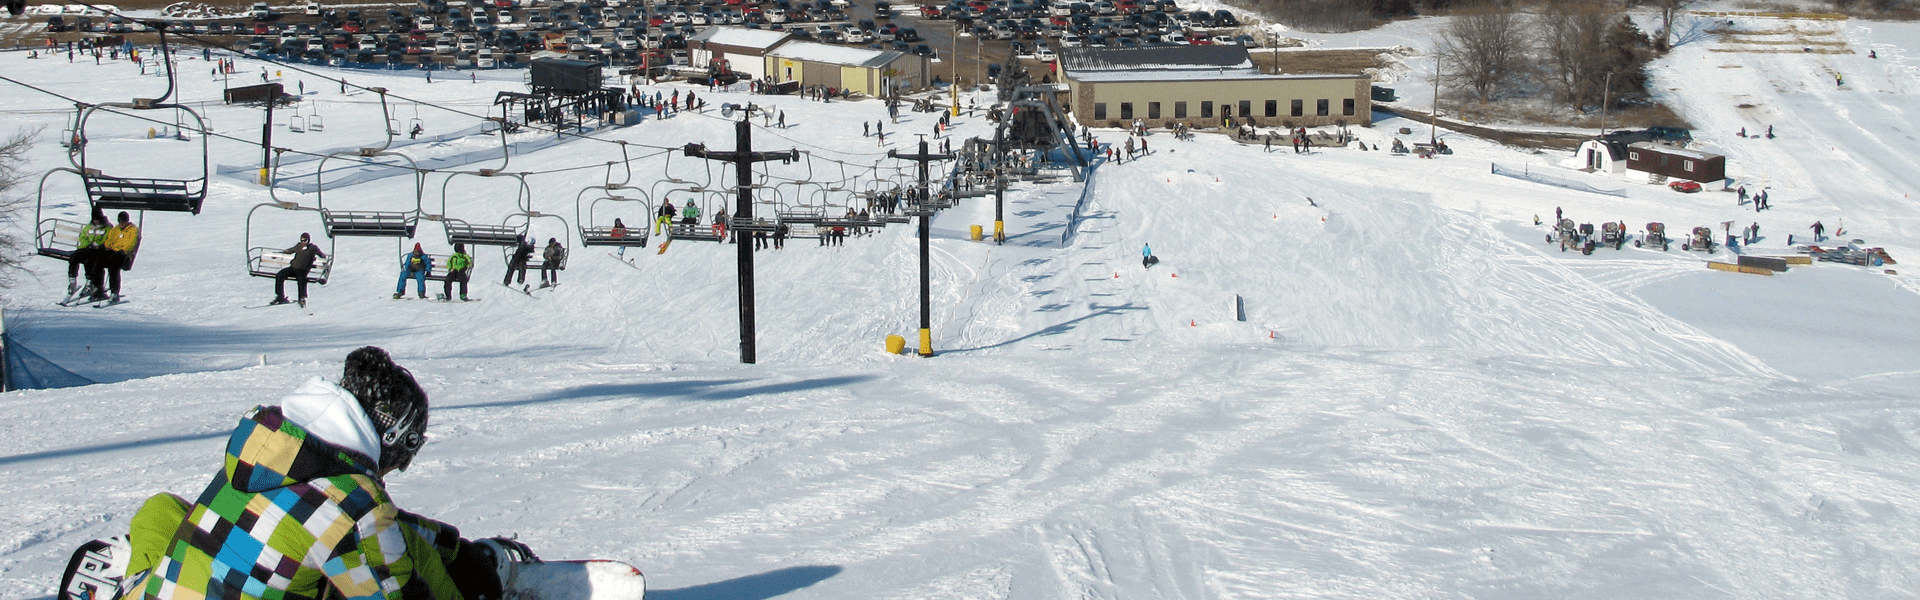 Seven Oaks is the place to ski, snowboard and snow tube in central Iowa! Located in Boone, IA.